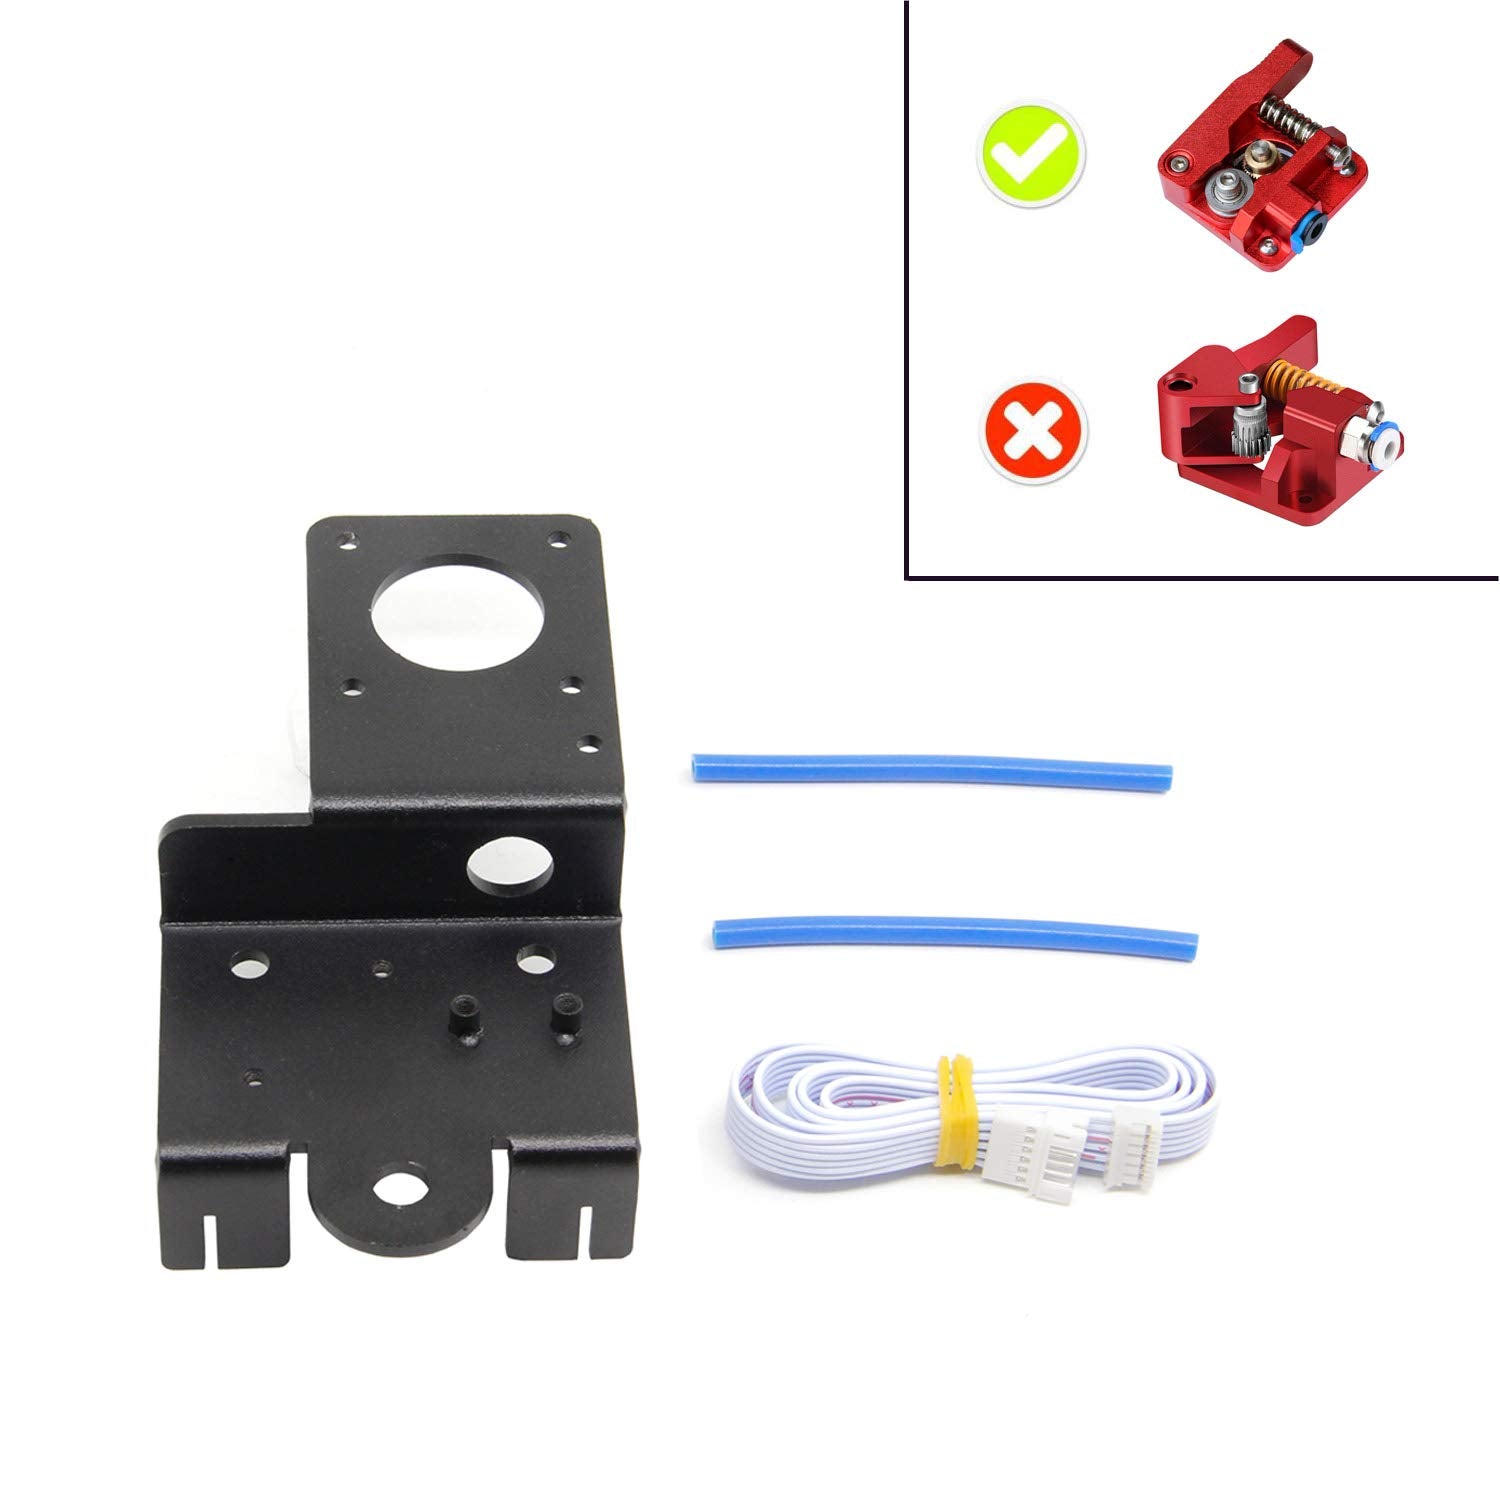 Direct Drive Extruder Upgrade Kit for Creality Ender 3 / Pro / CR-10 3D Printers